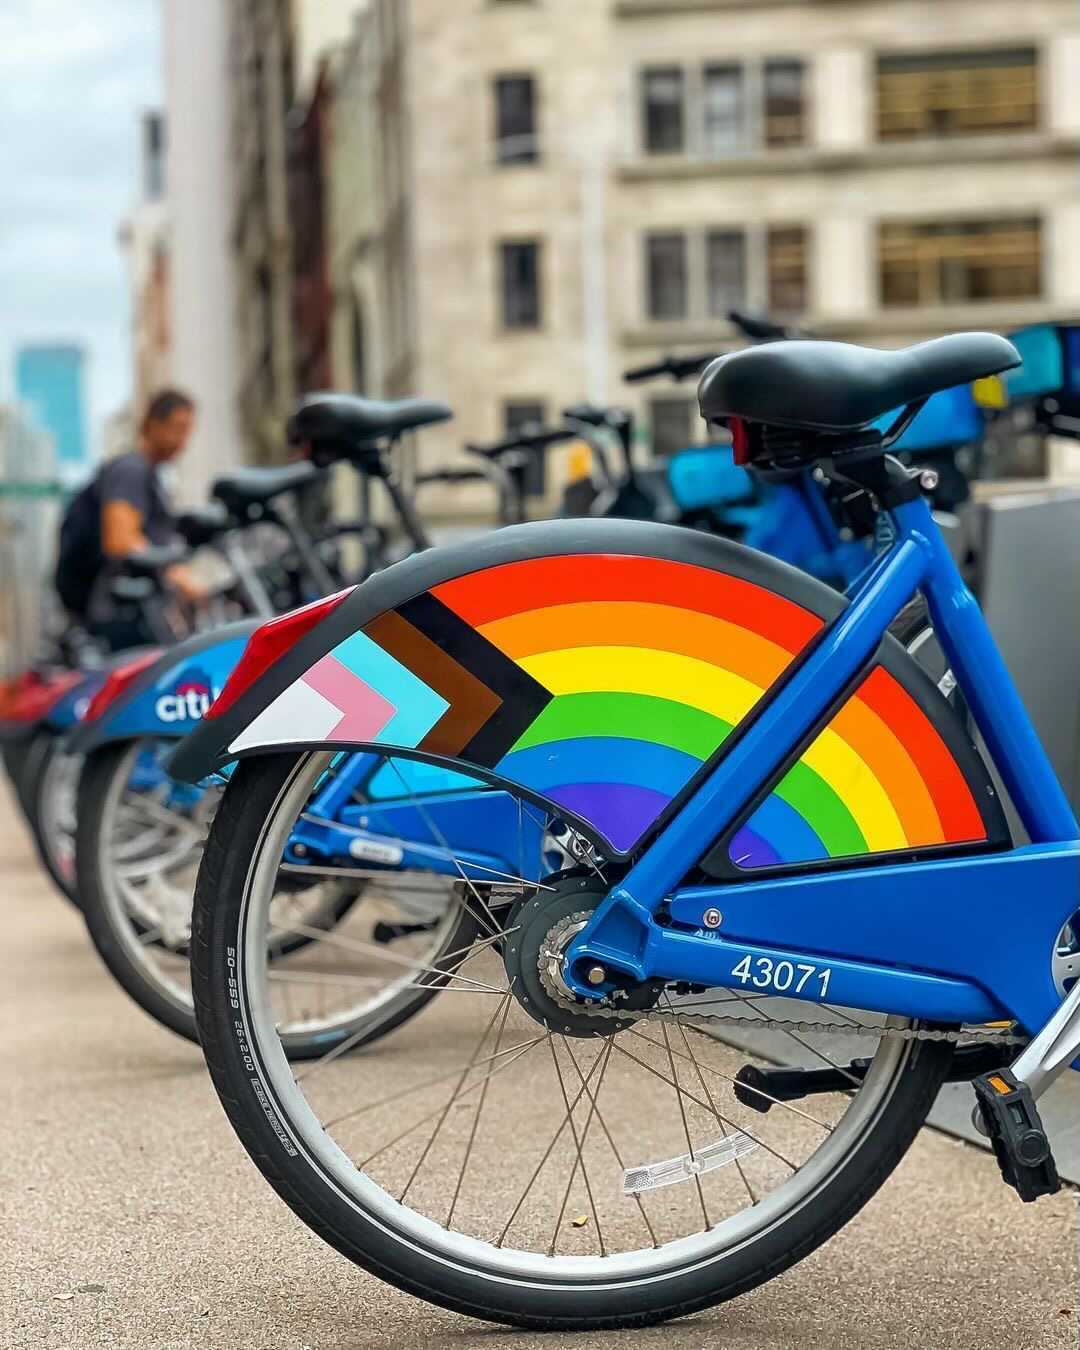 A Citi Bike with a PRIDE logo on the rear fender